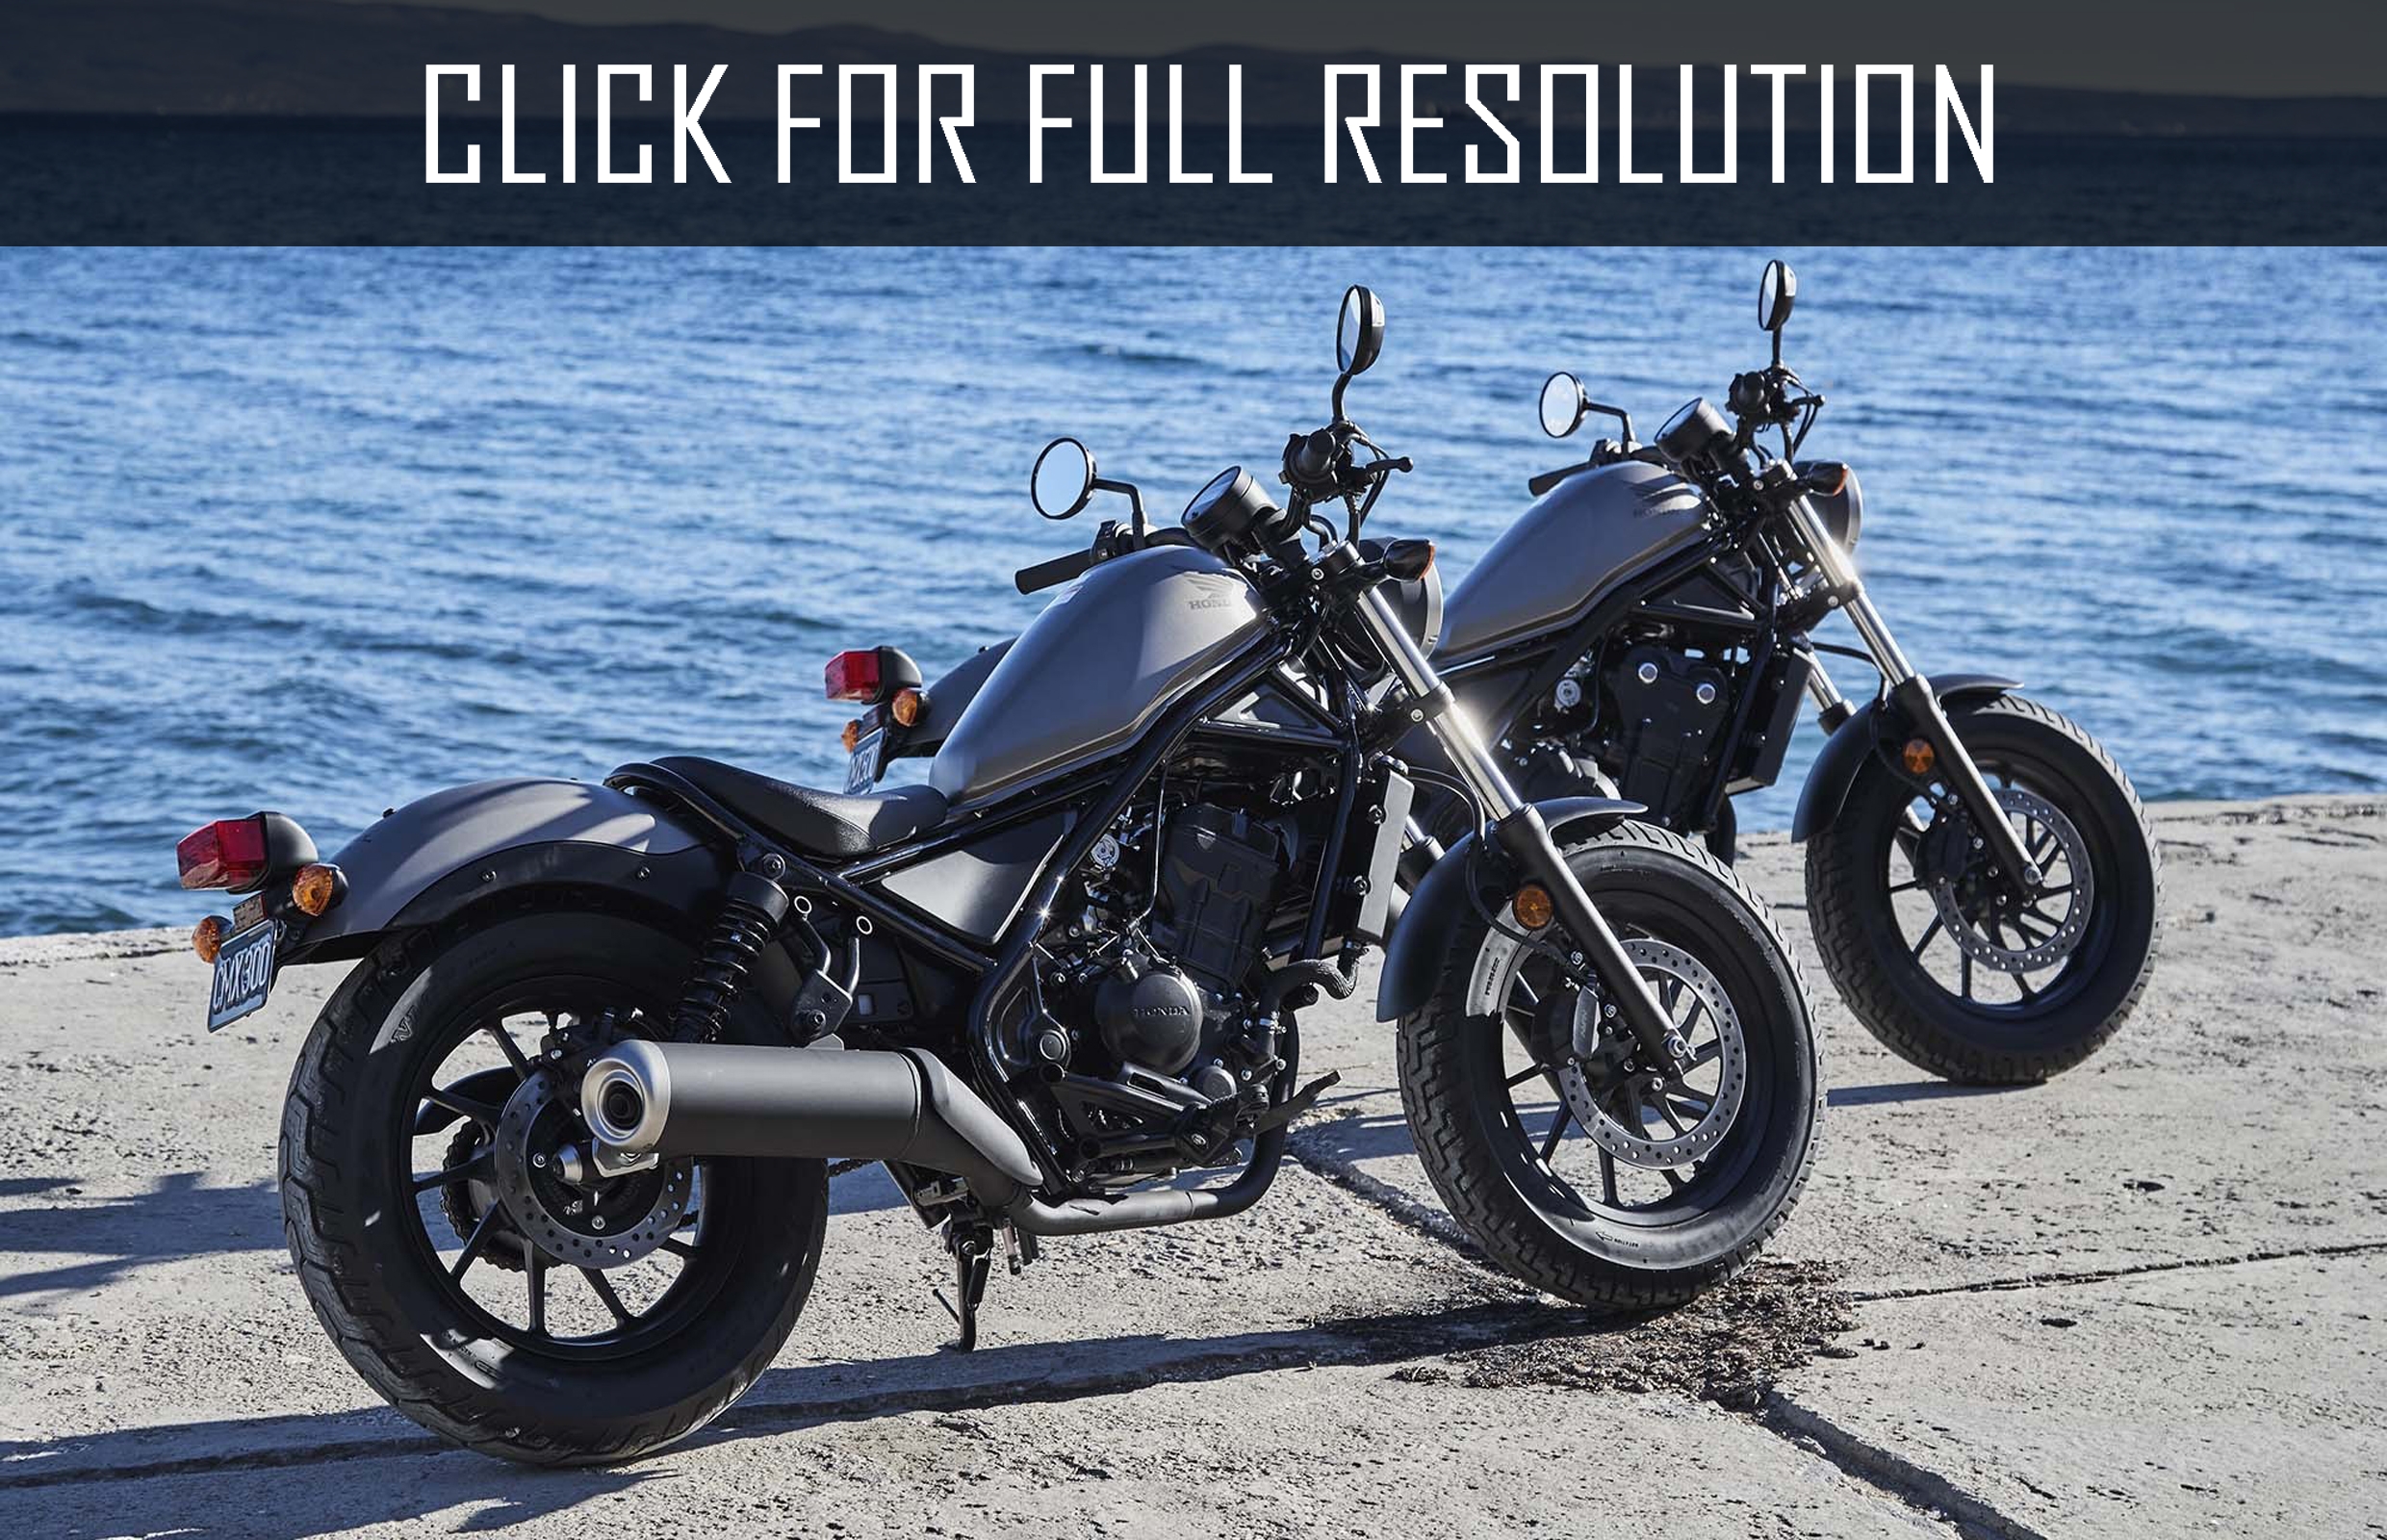 Honda Rebel 350 - amazing photo gallery, some information and ...